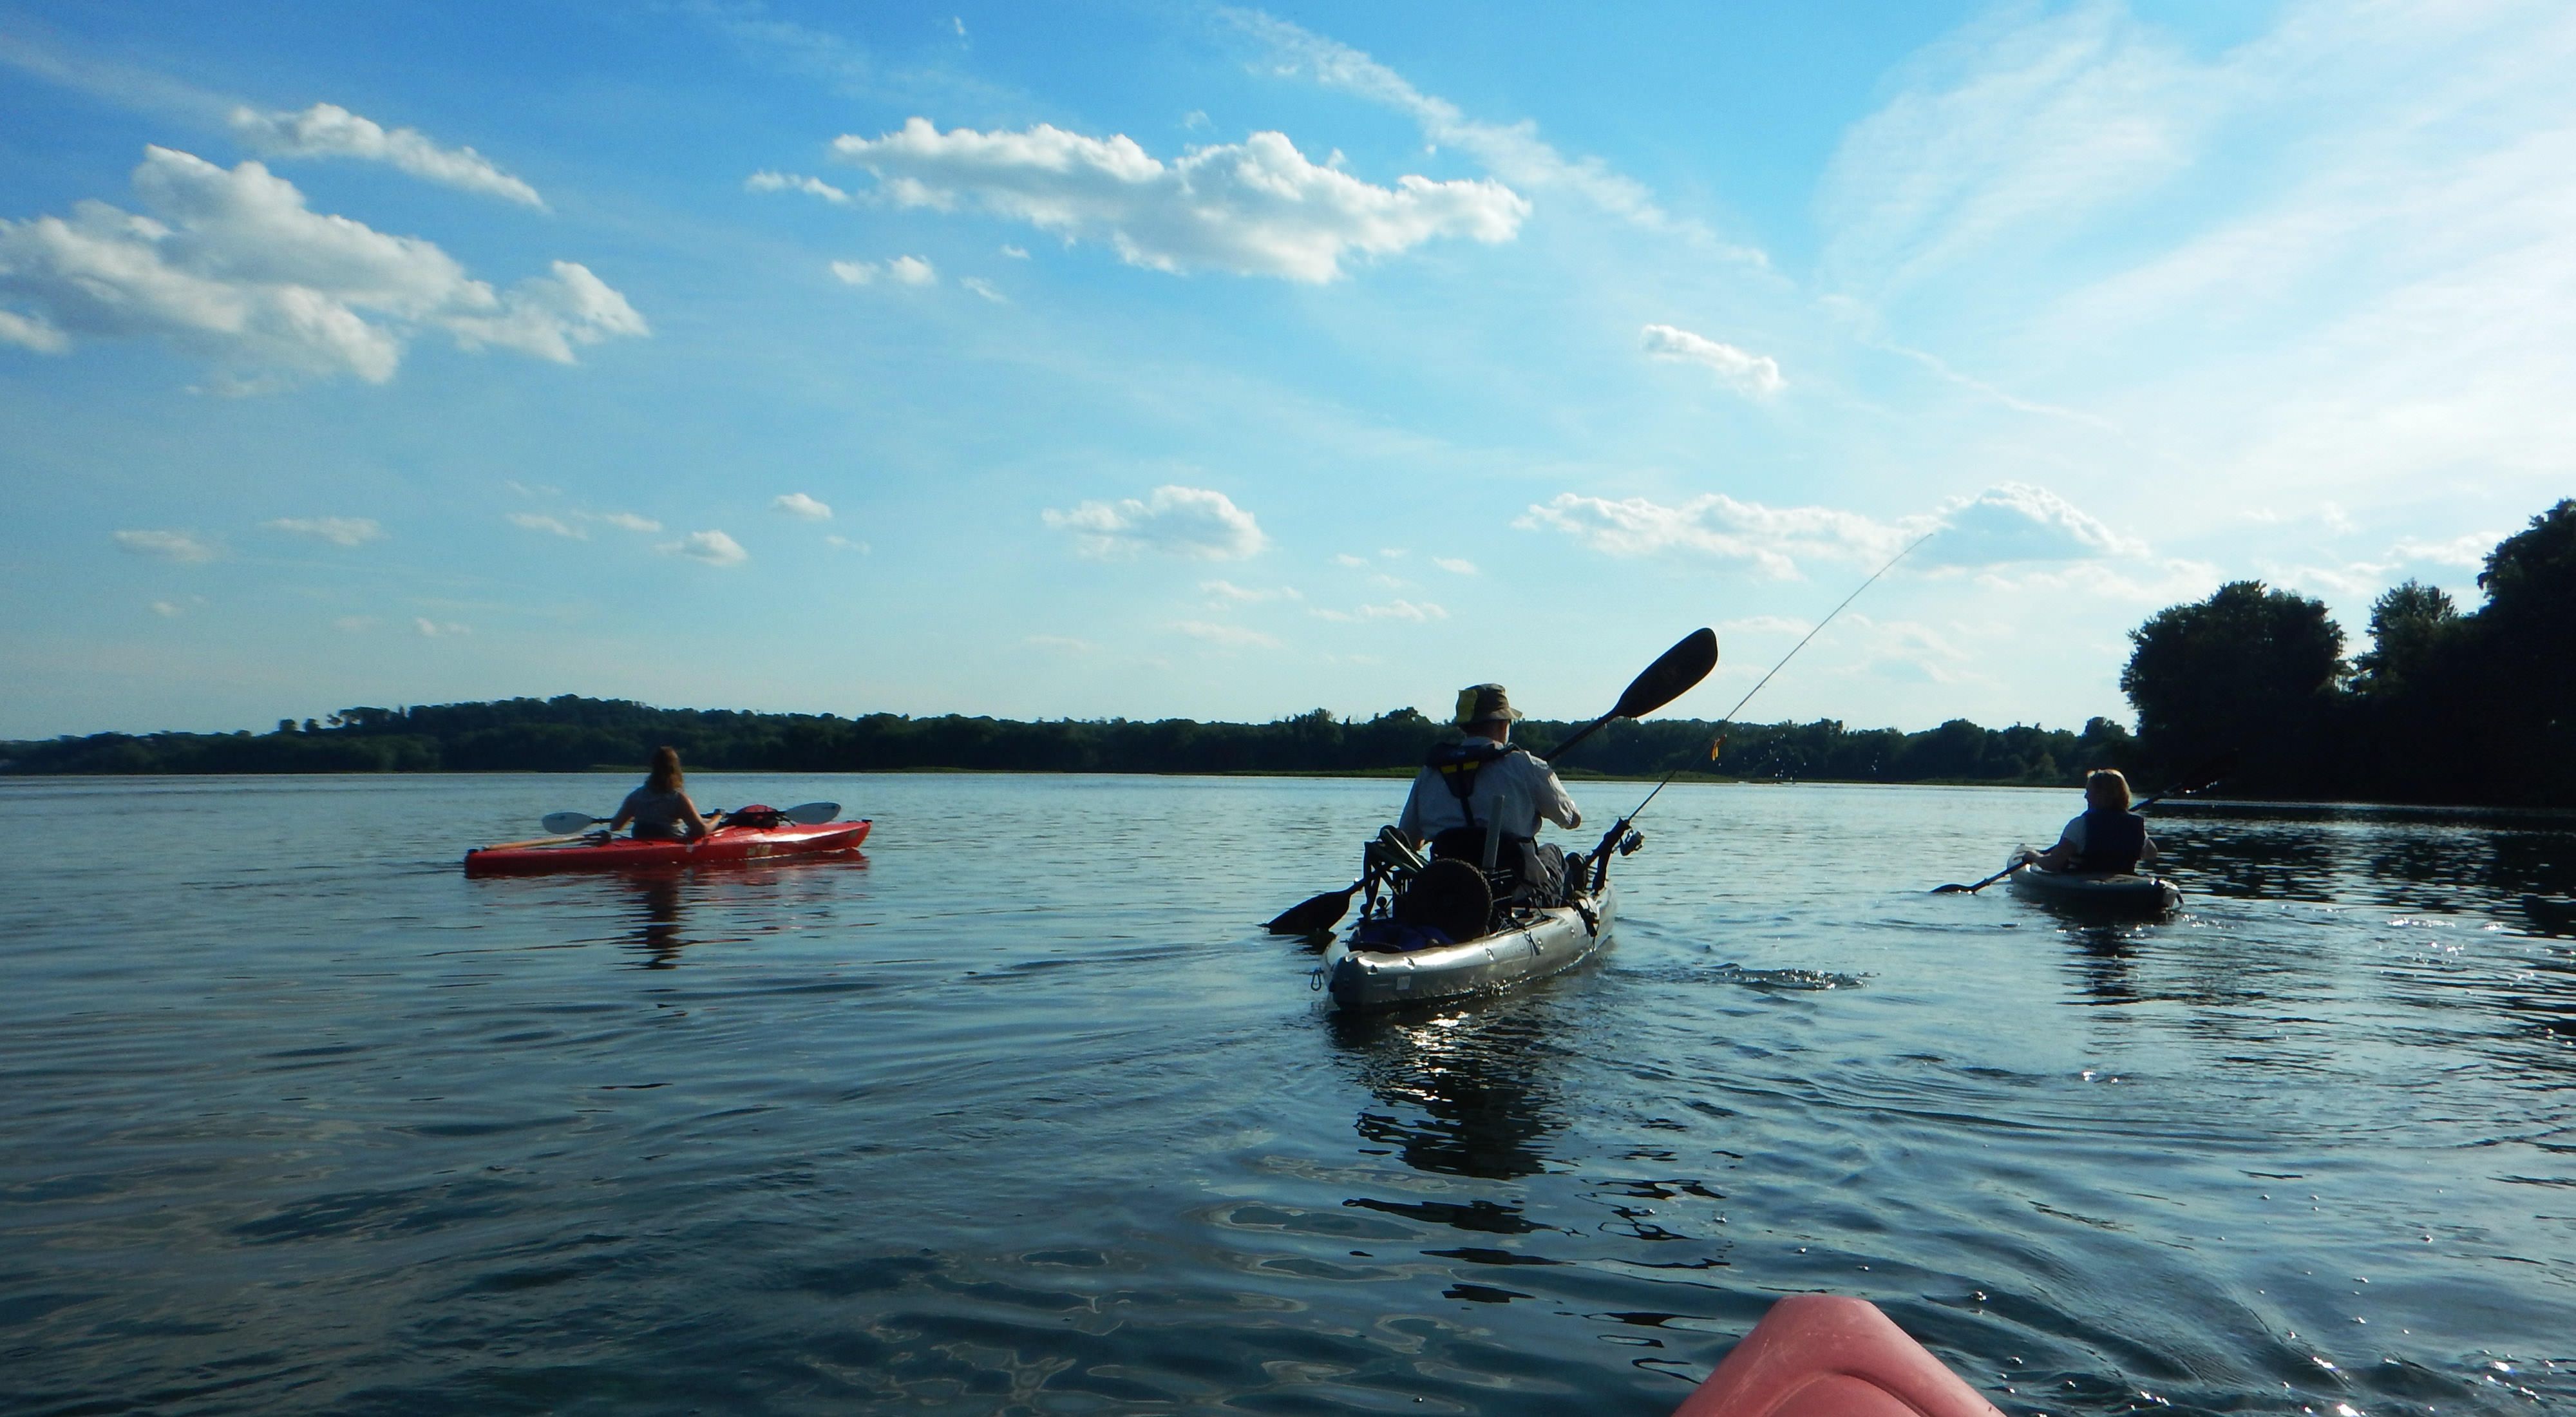 Three people kayak along the Susquehanna River. The wide, calm river bends off into the distance to the right curving behind a stand of trees. A fishing pole is attached to the center kayak.